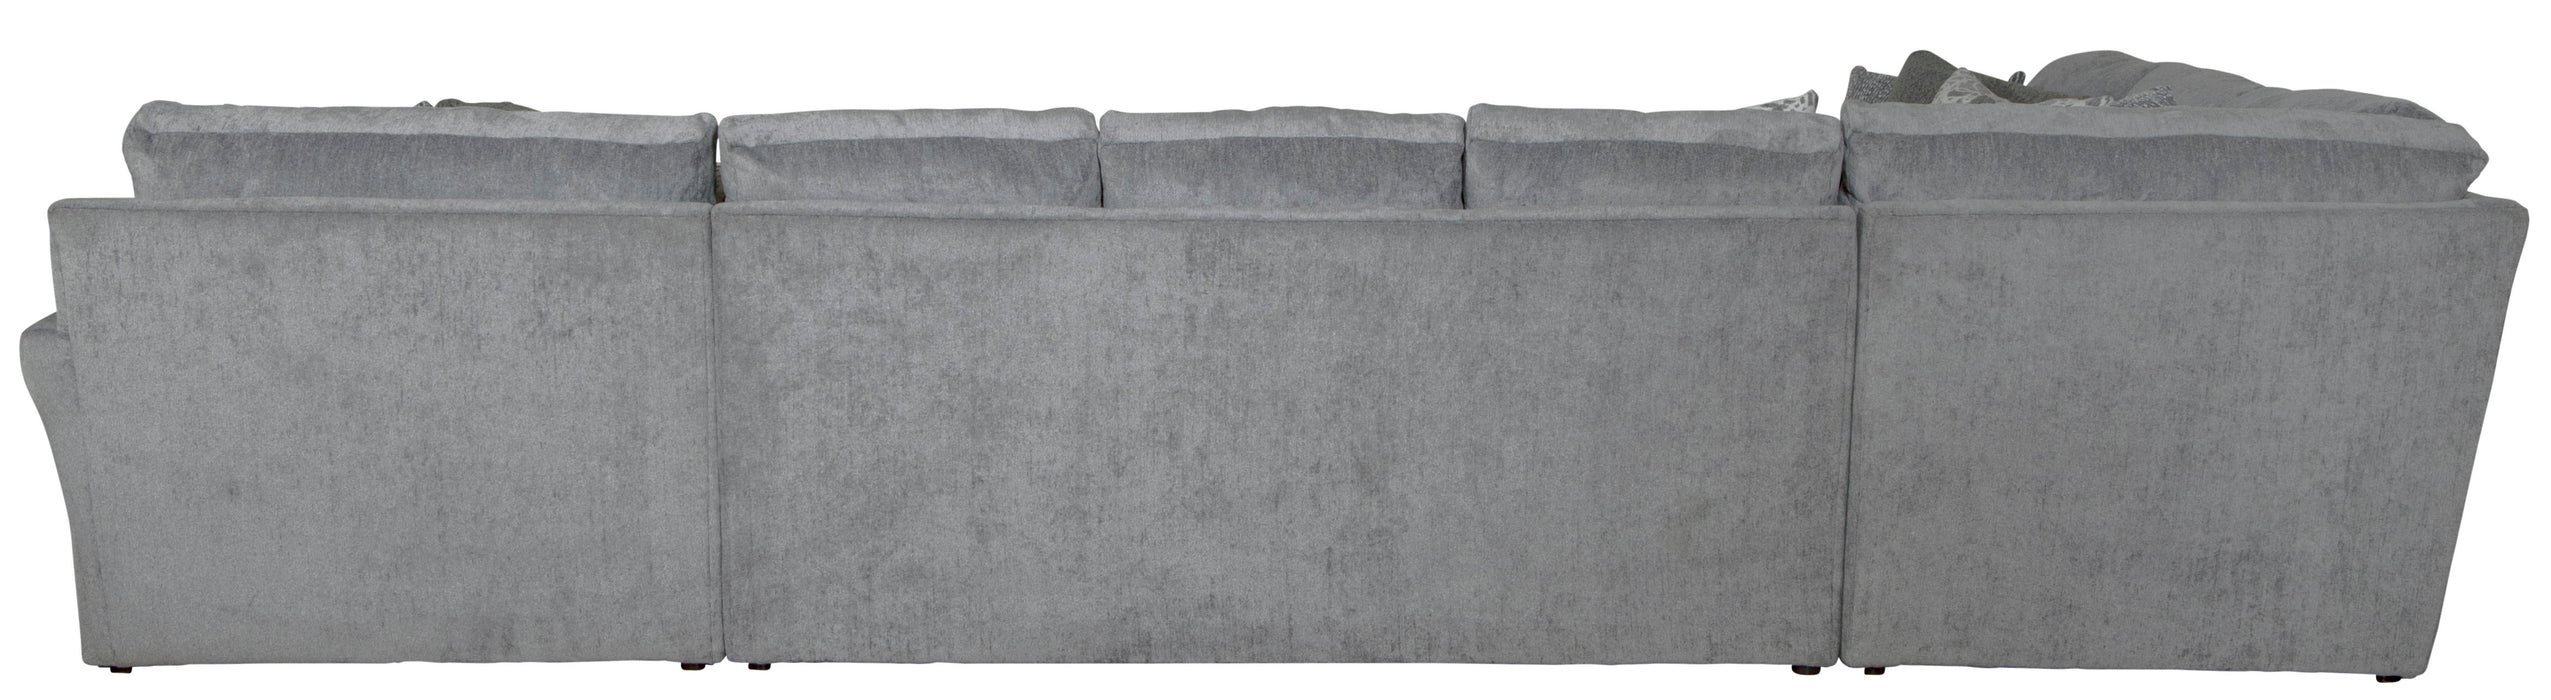 Glacier - 3 Piece Sectional And 9 Included Accent Pillows